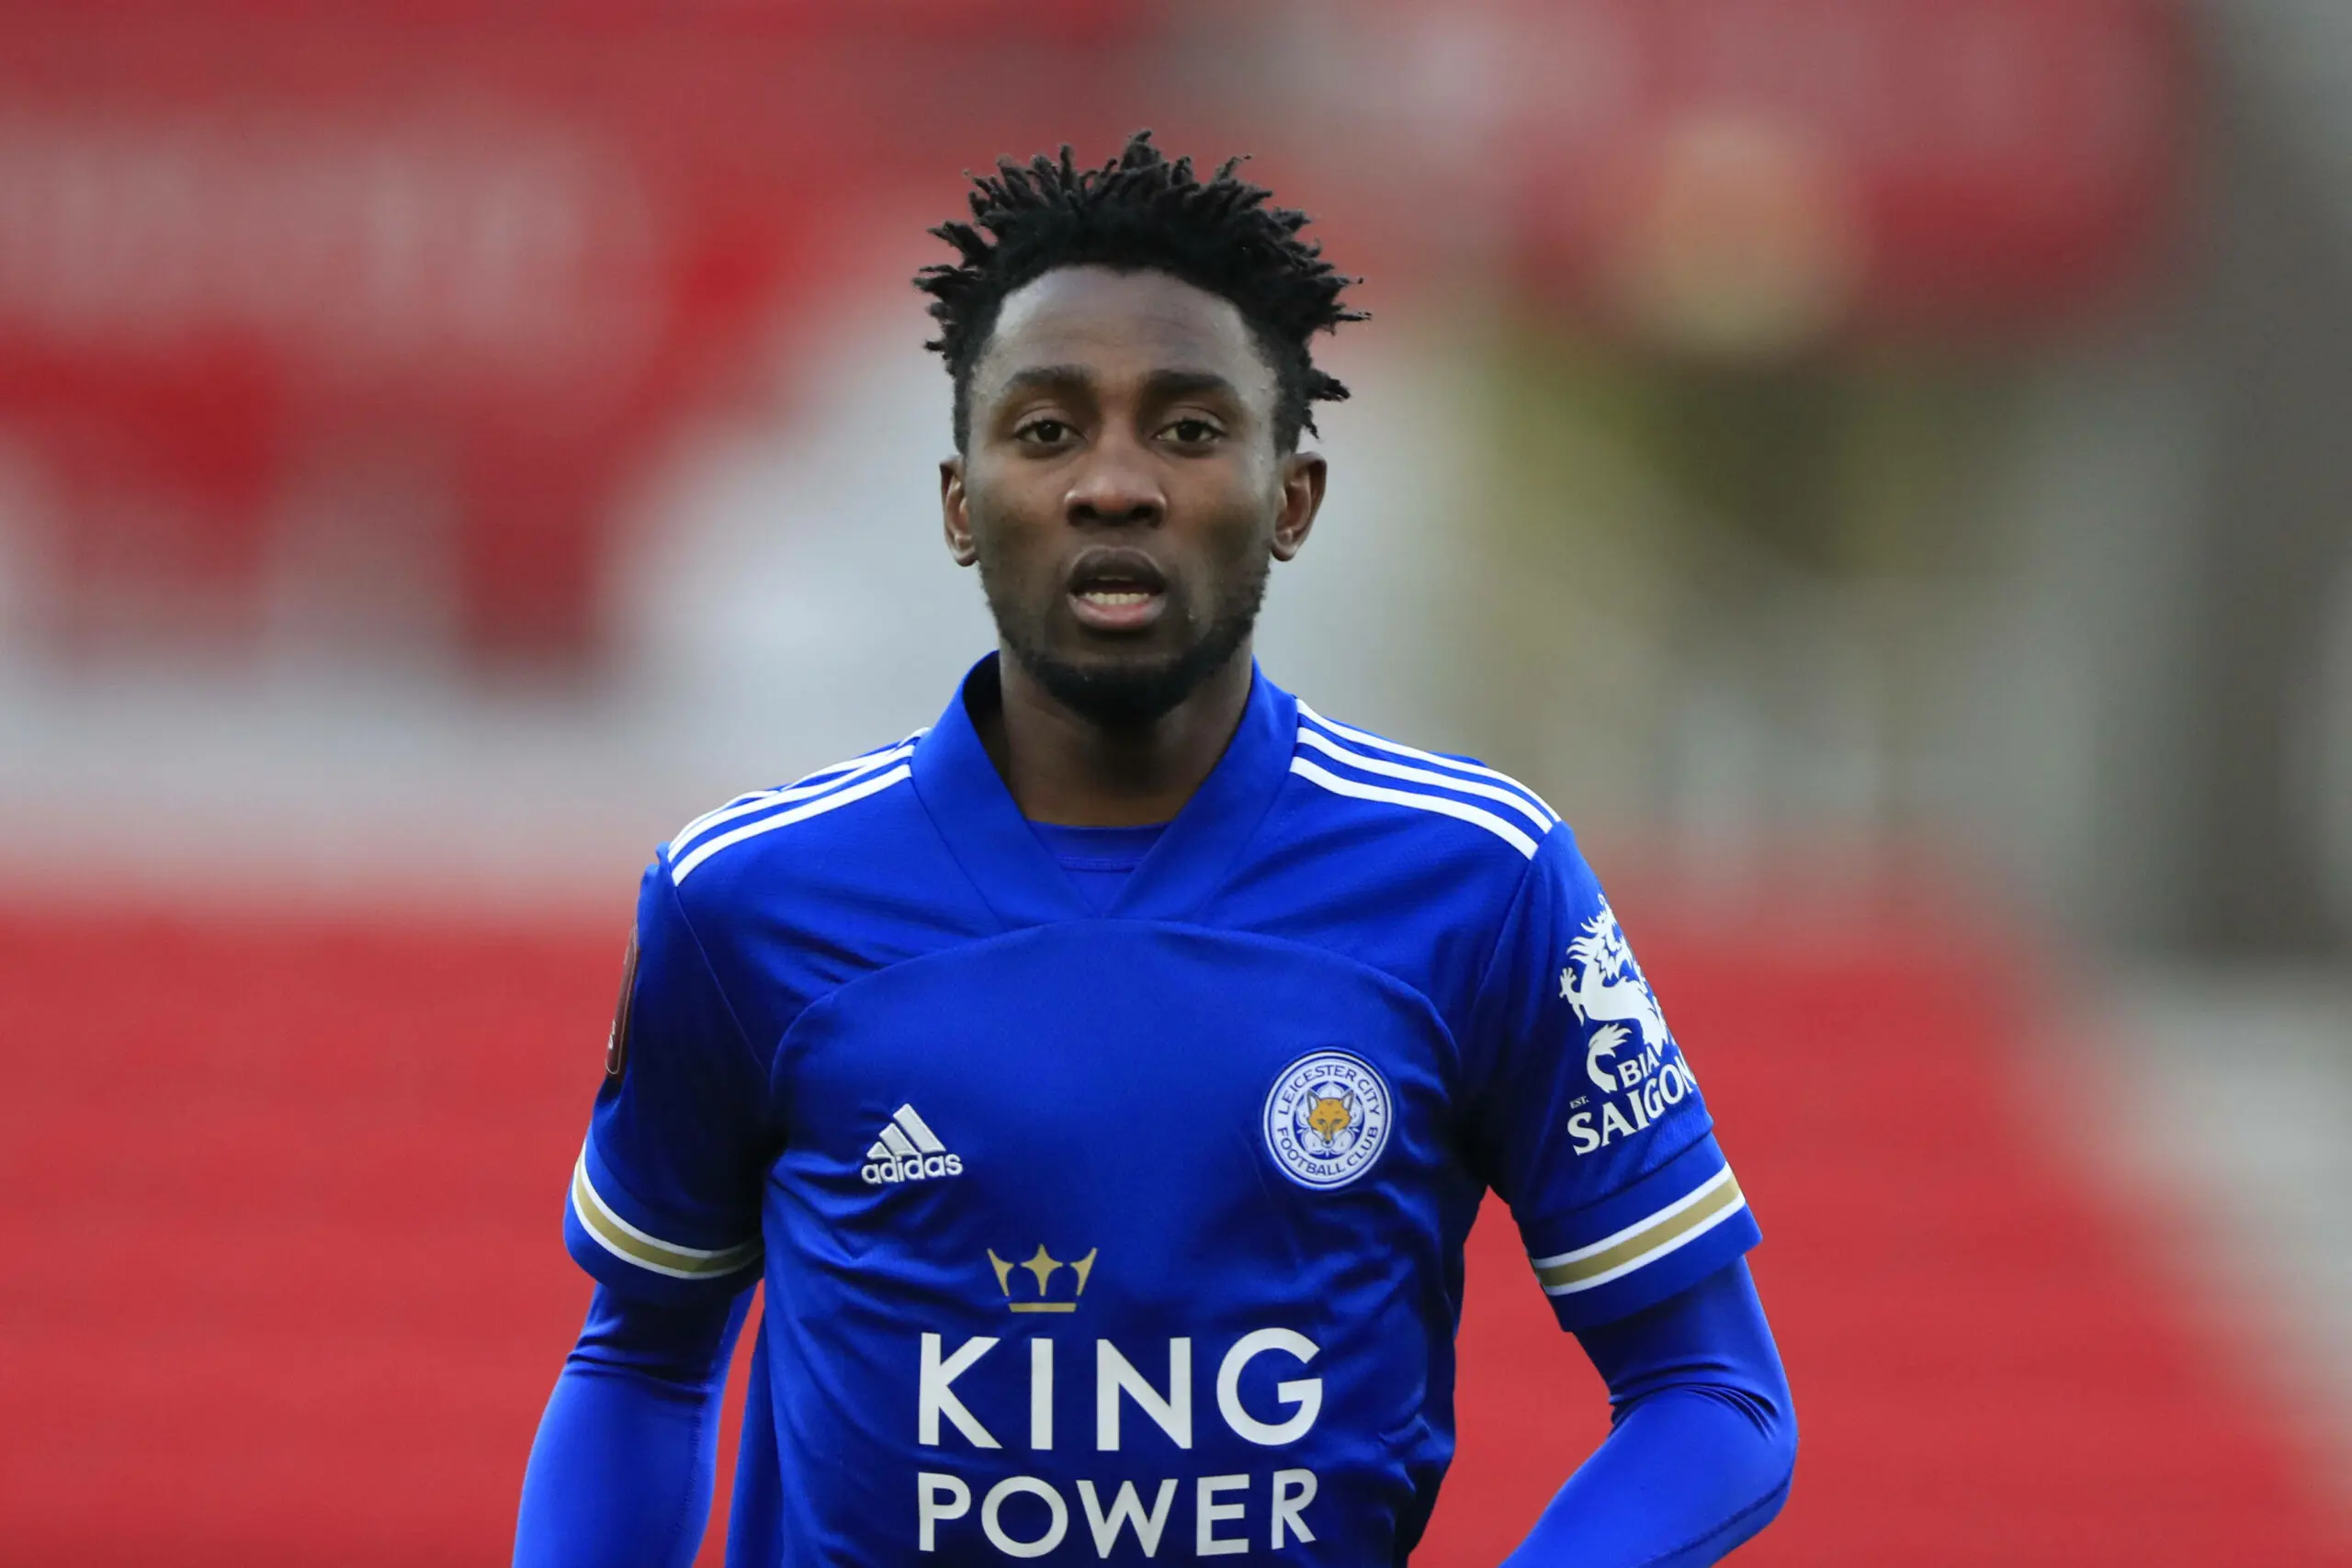 EPL: Leicester City pushing Ndidi to sign new contract